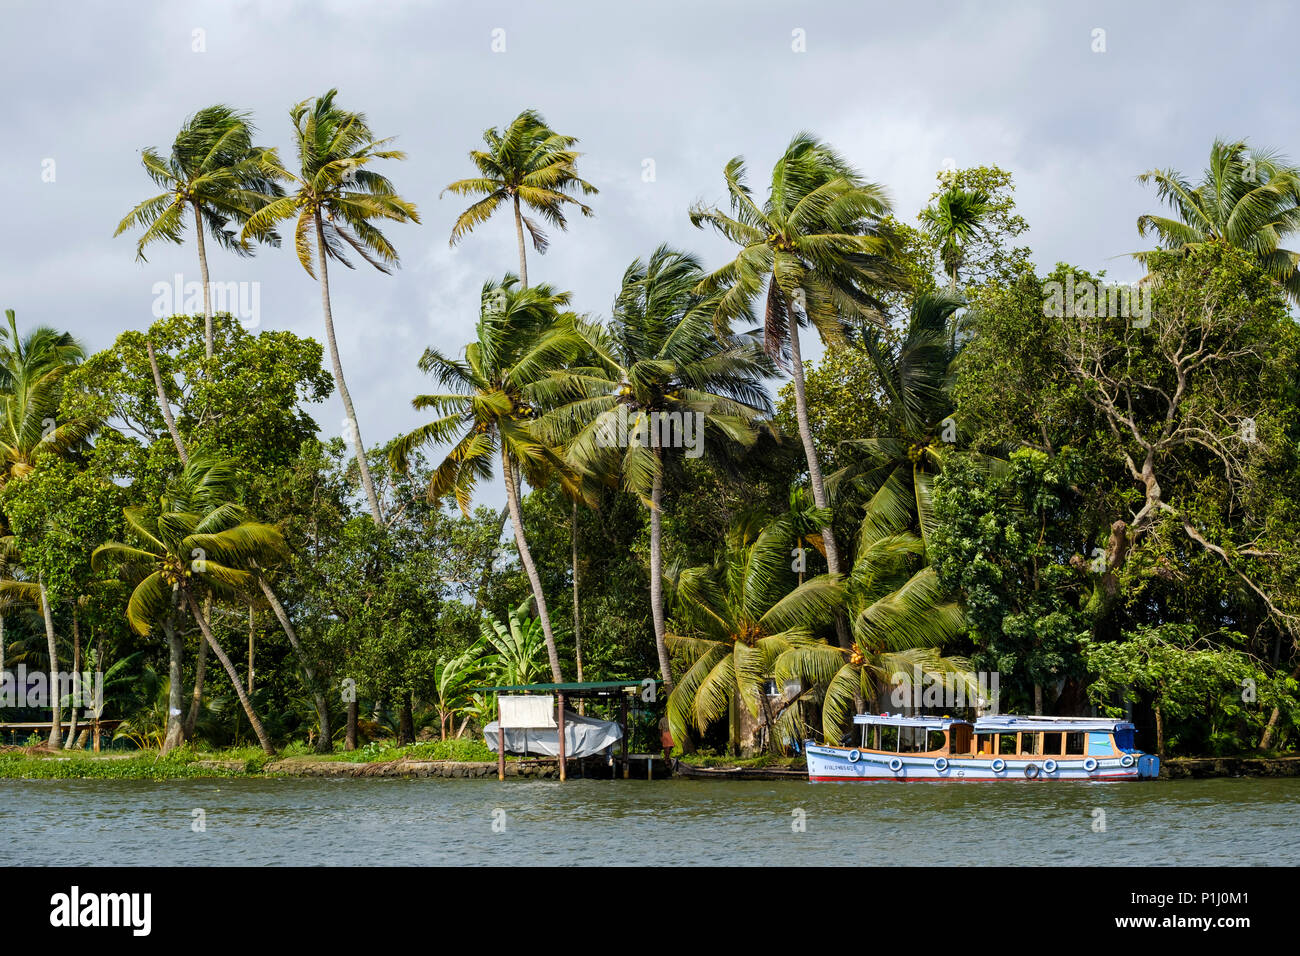 A boat moored in the Alappuzha (or Alleppey) backwaters, Kerala State, India. Stock Photo